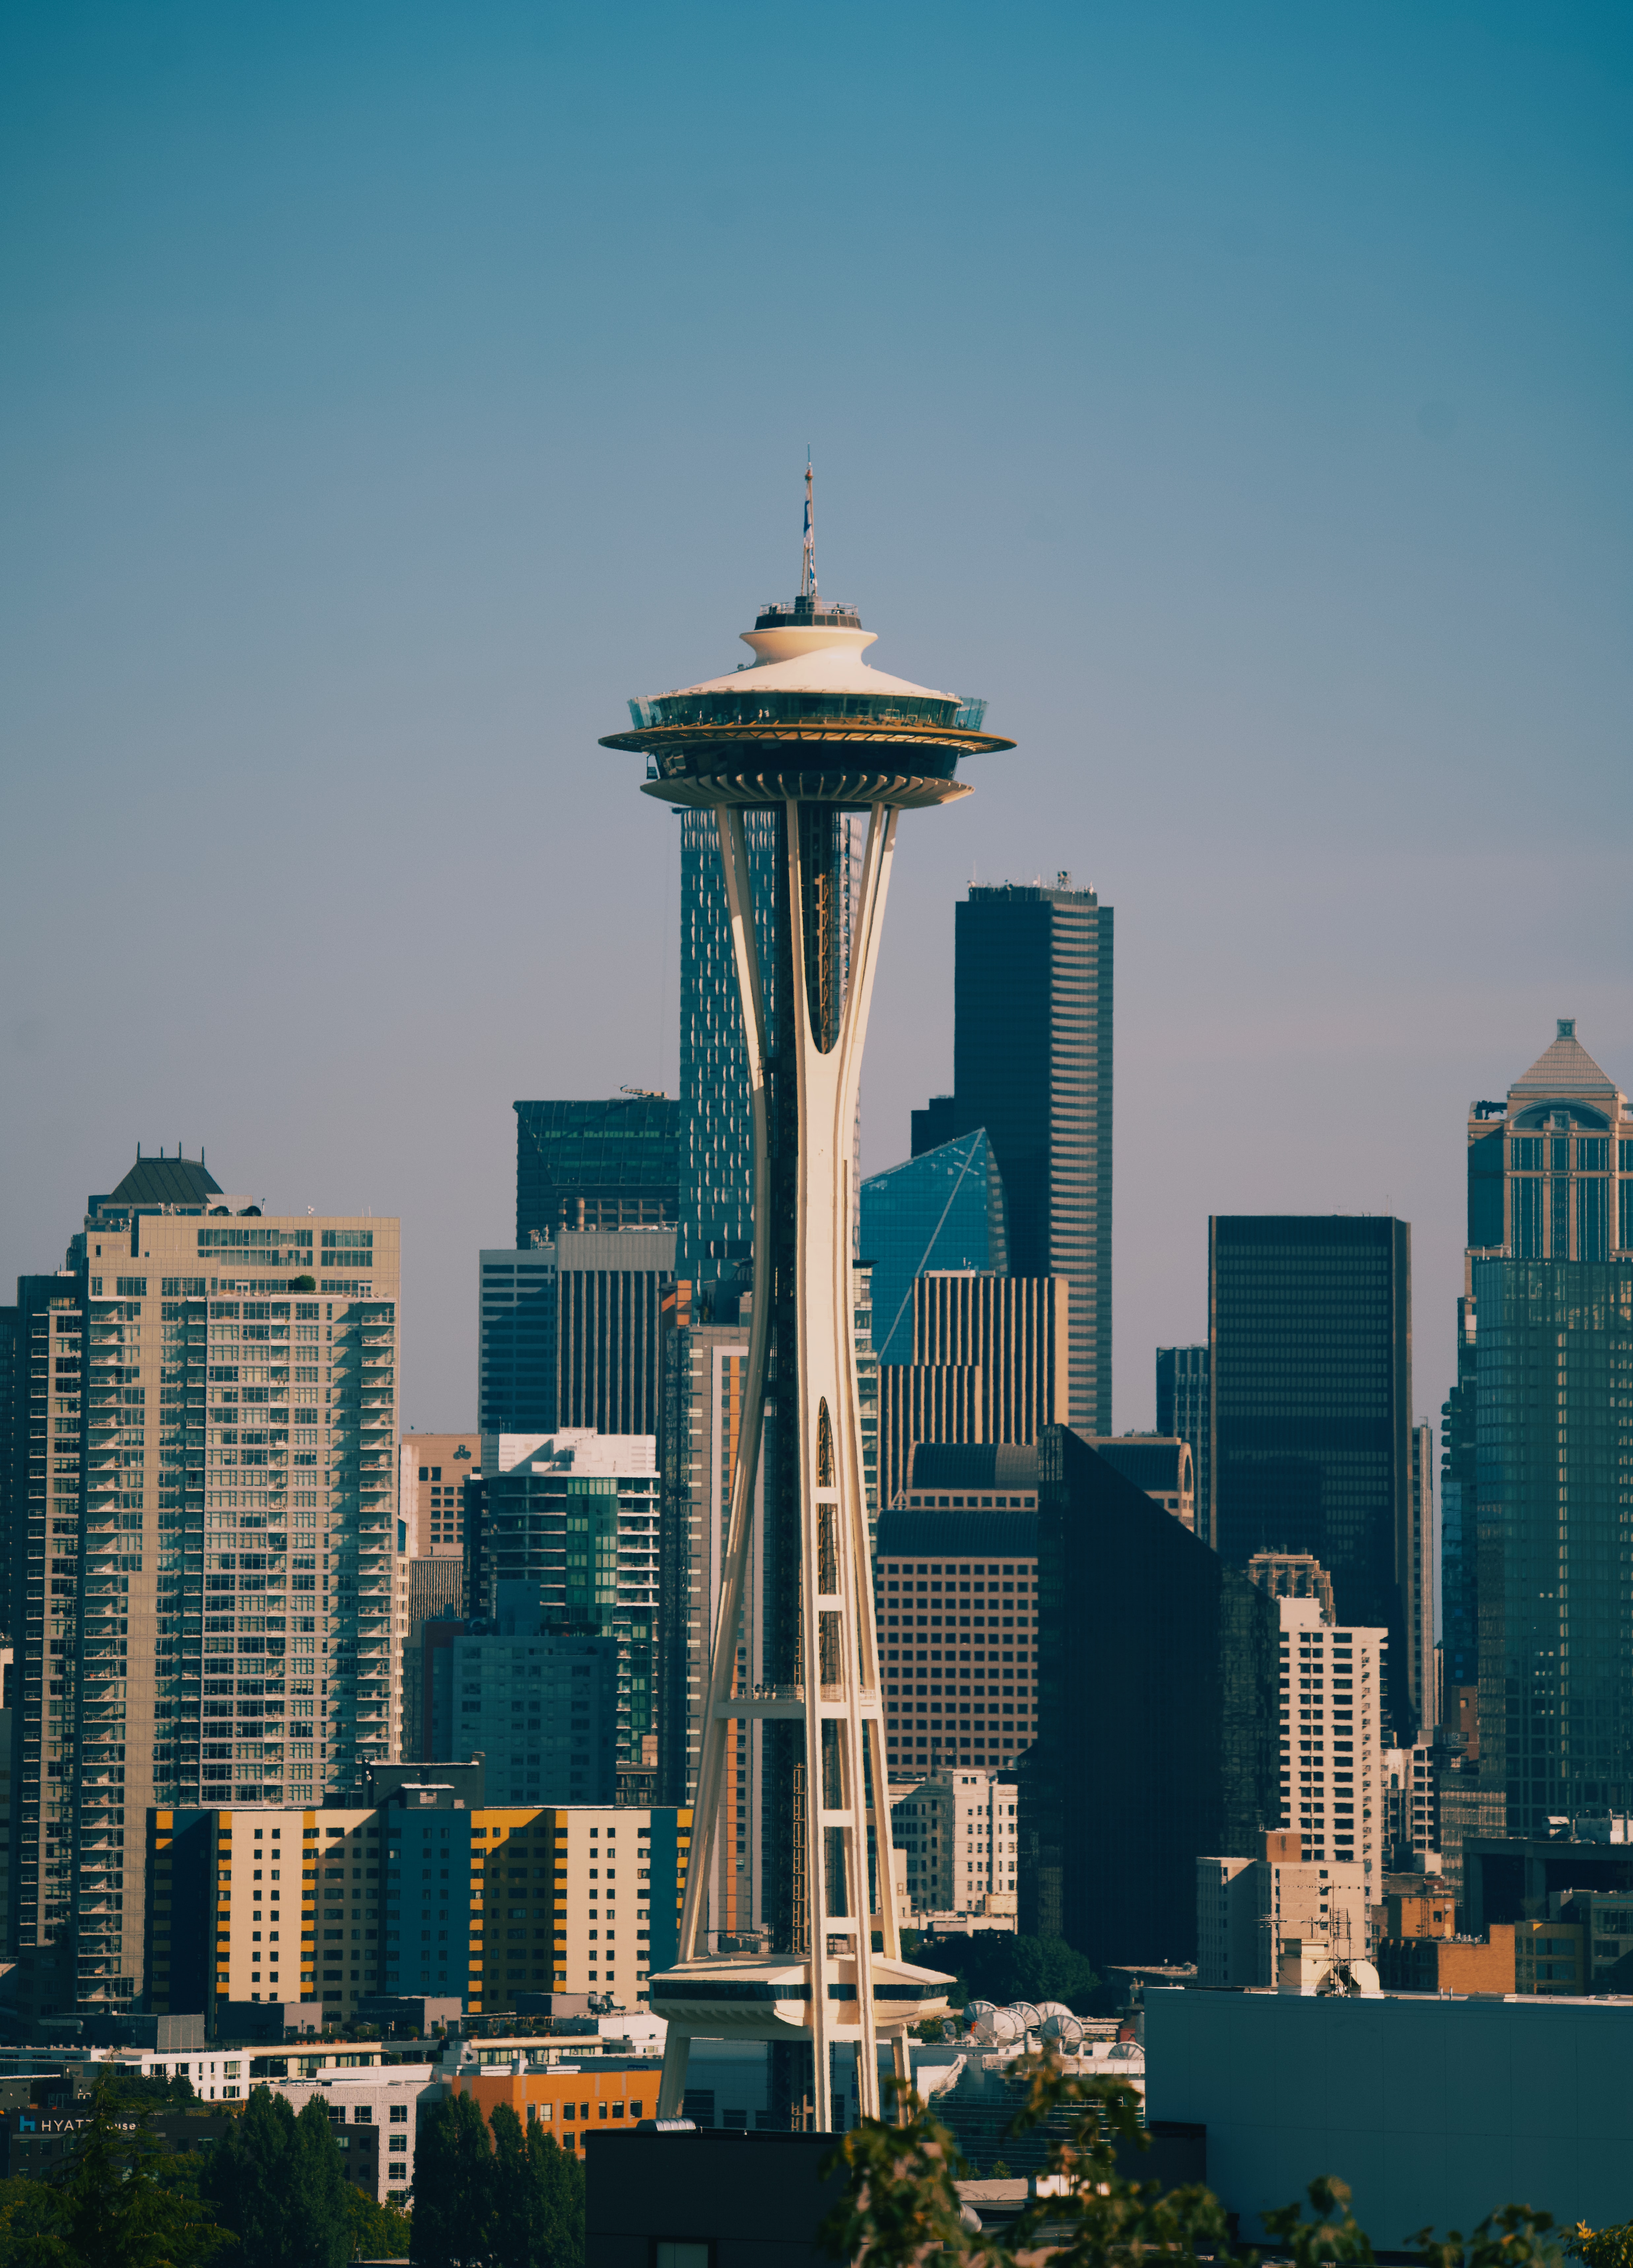 cities, architecture, usa, city, building, skyscrapers, united states, tower, seattle